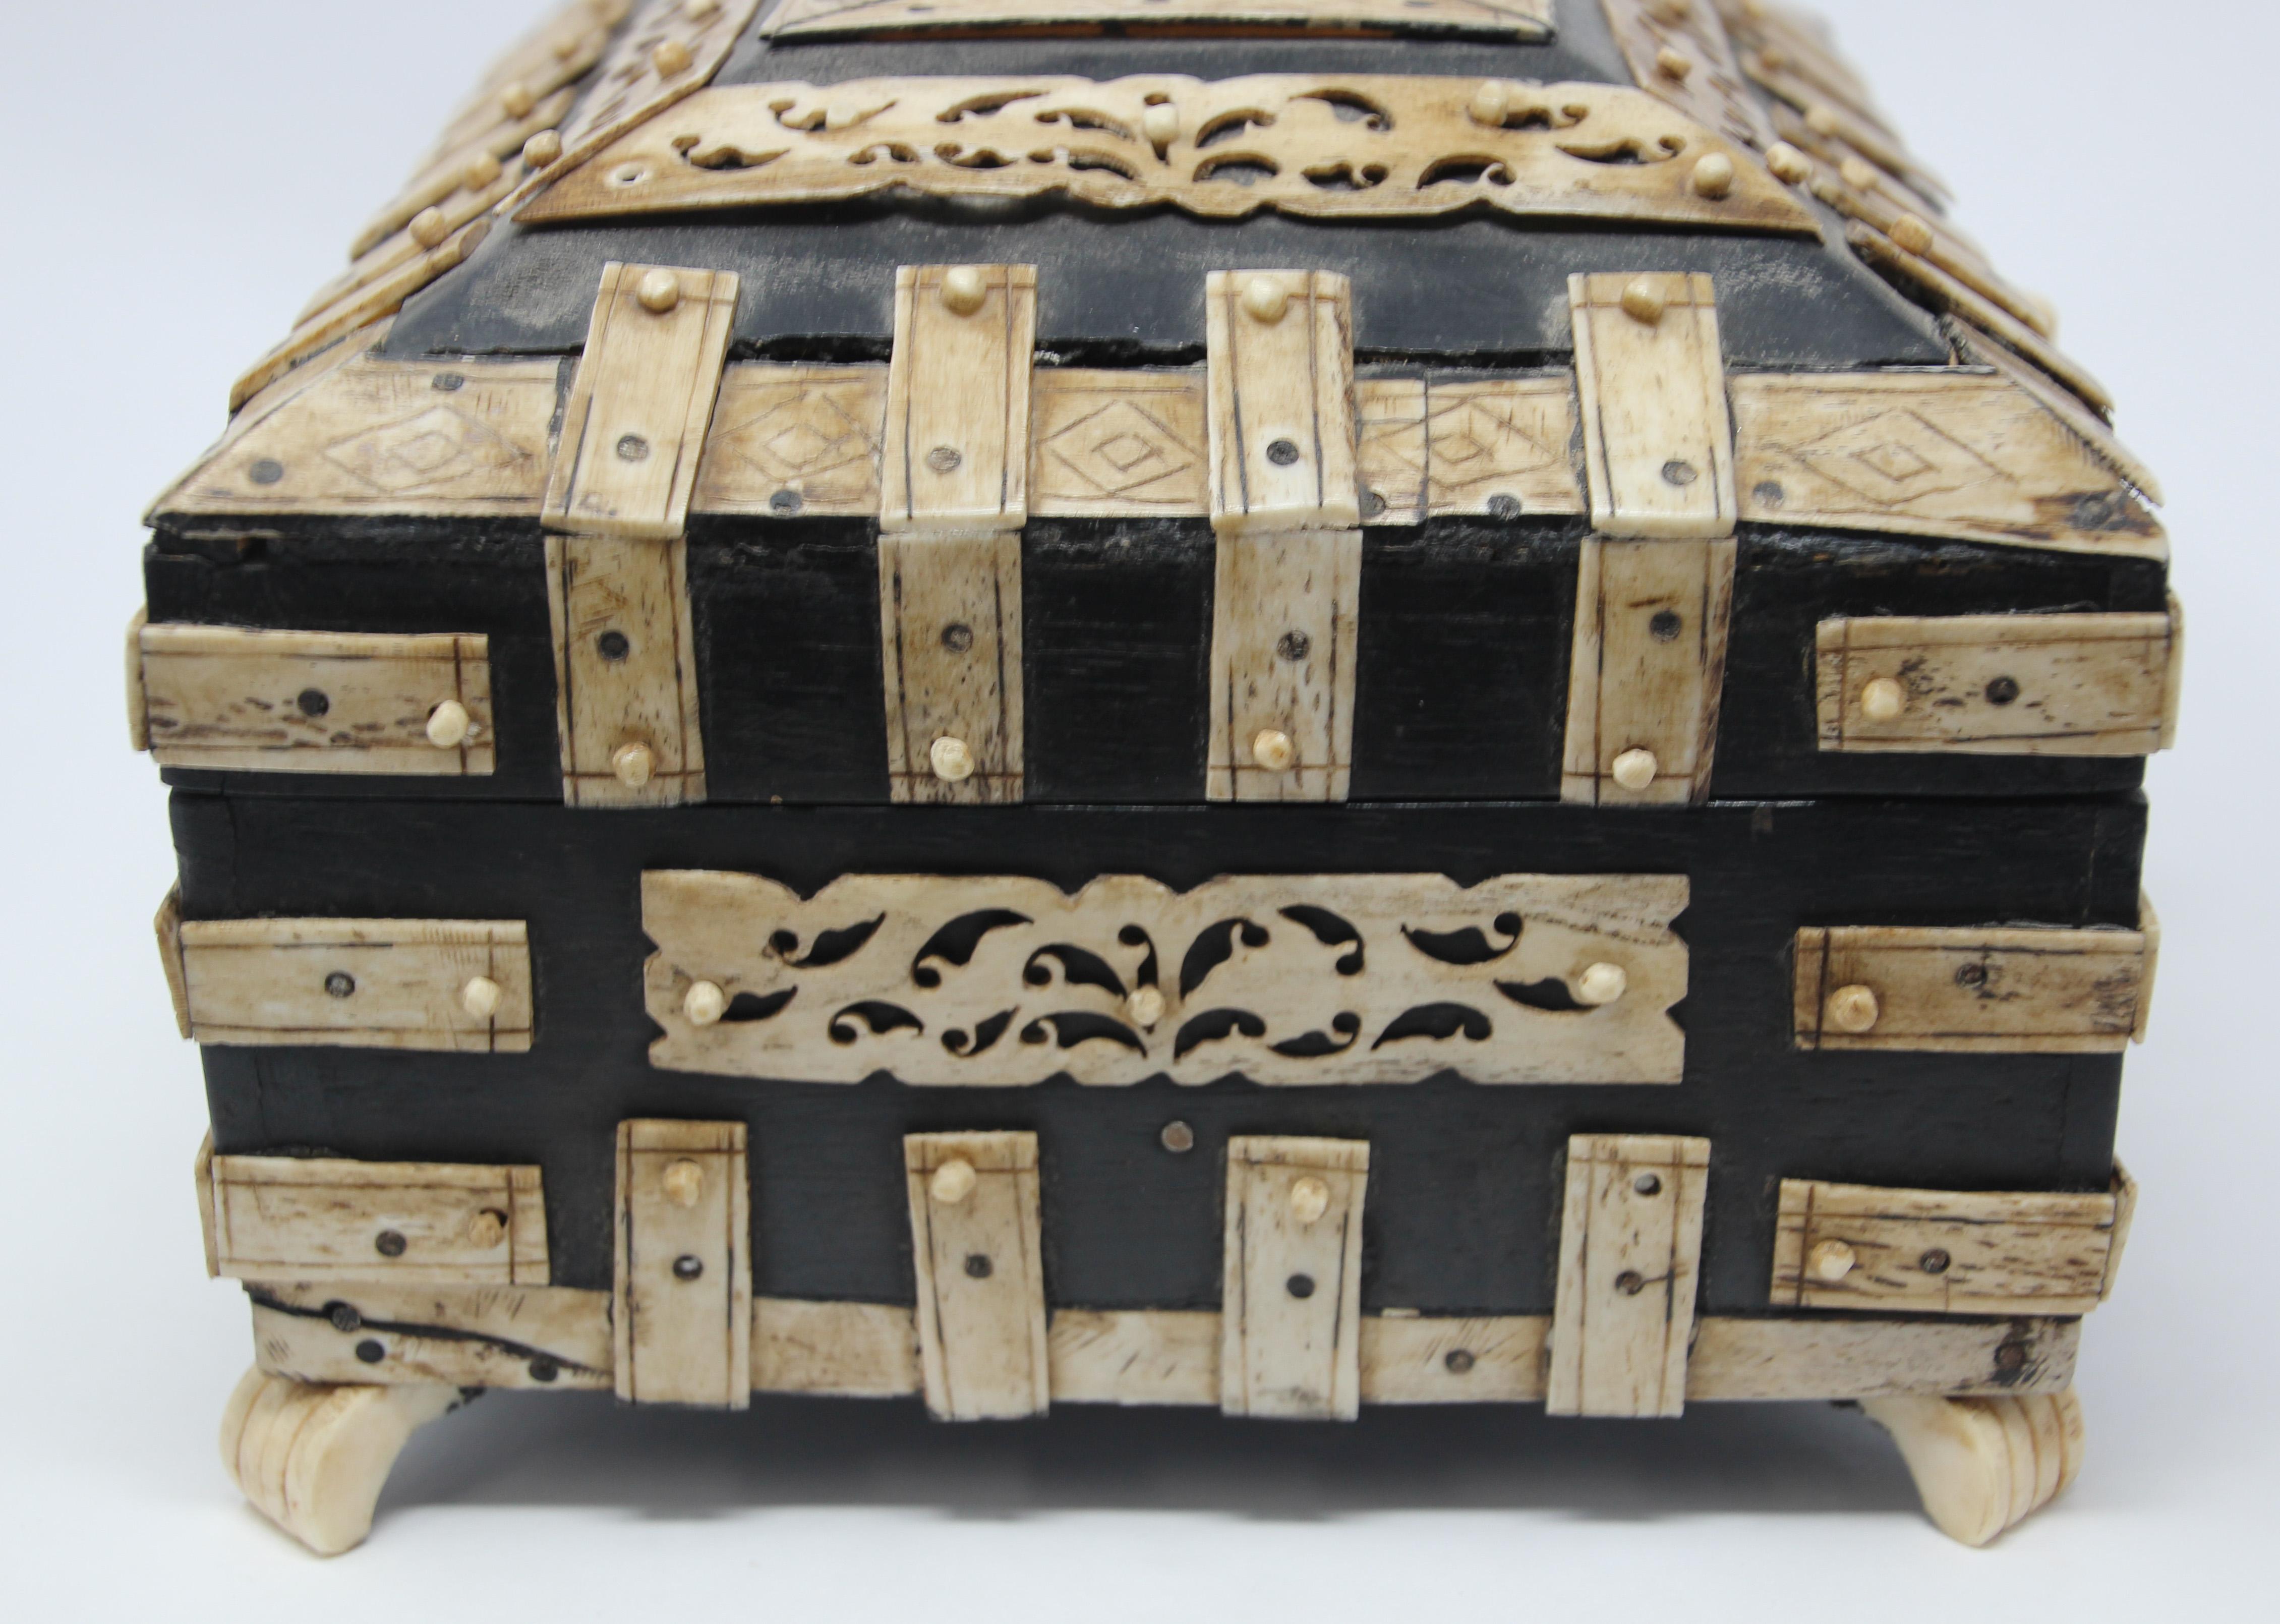 Antique 19th c. Decorative Anglo-Indian Overlay Footed Box with Engraved Bone For Sale 6